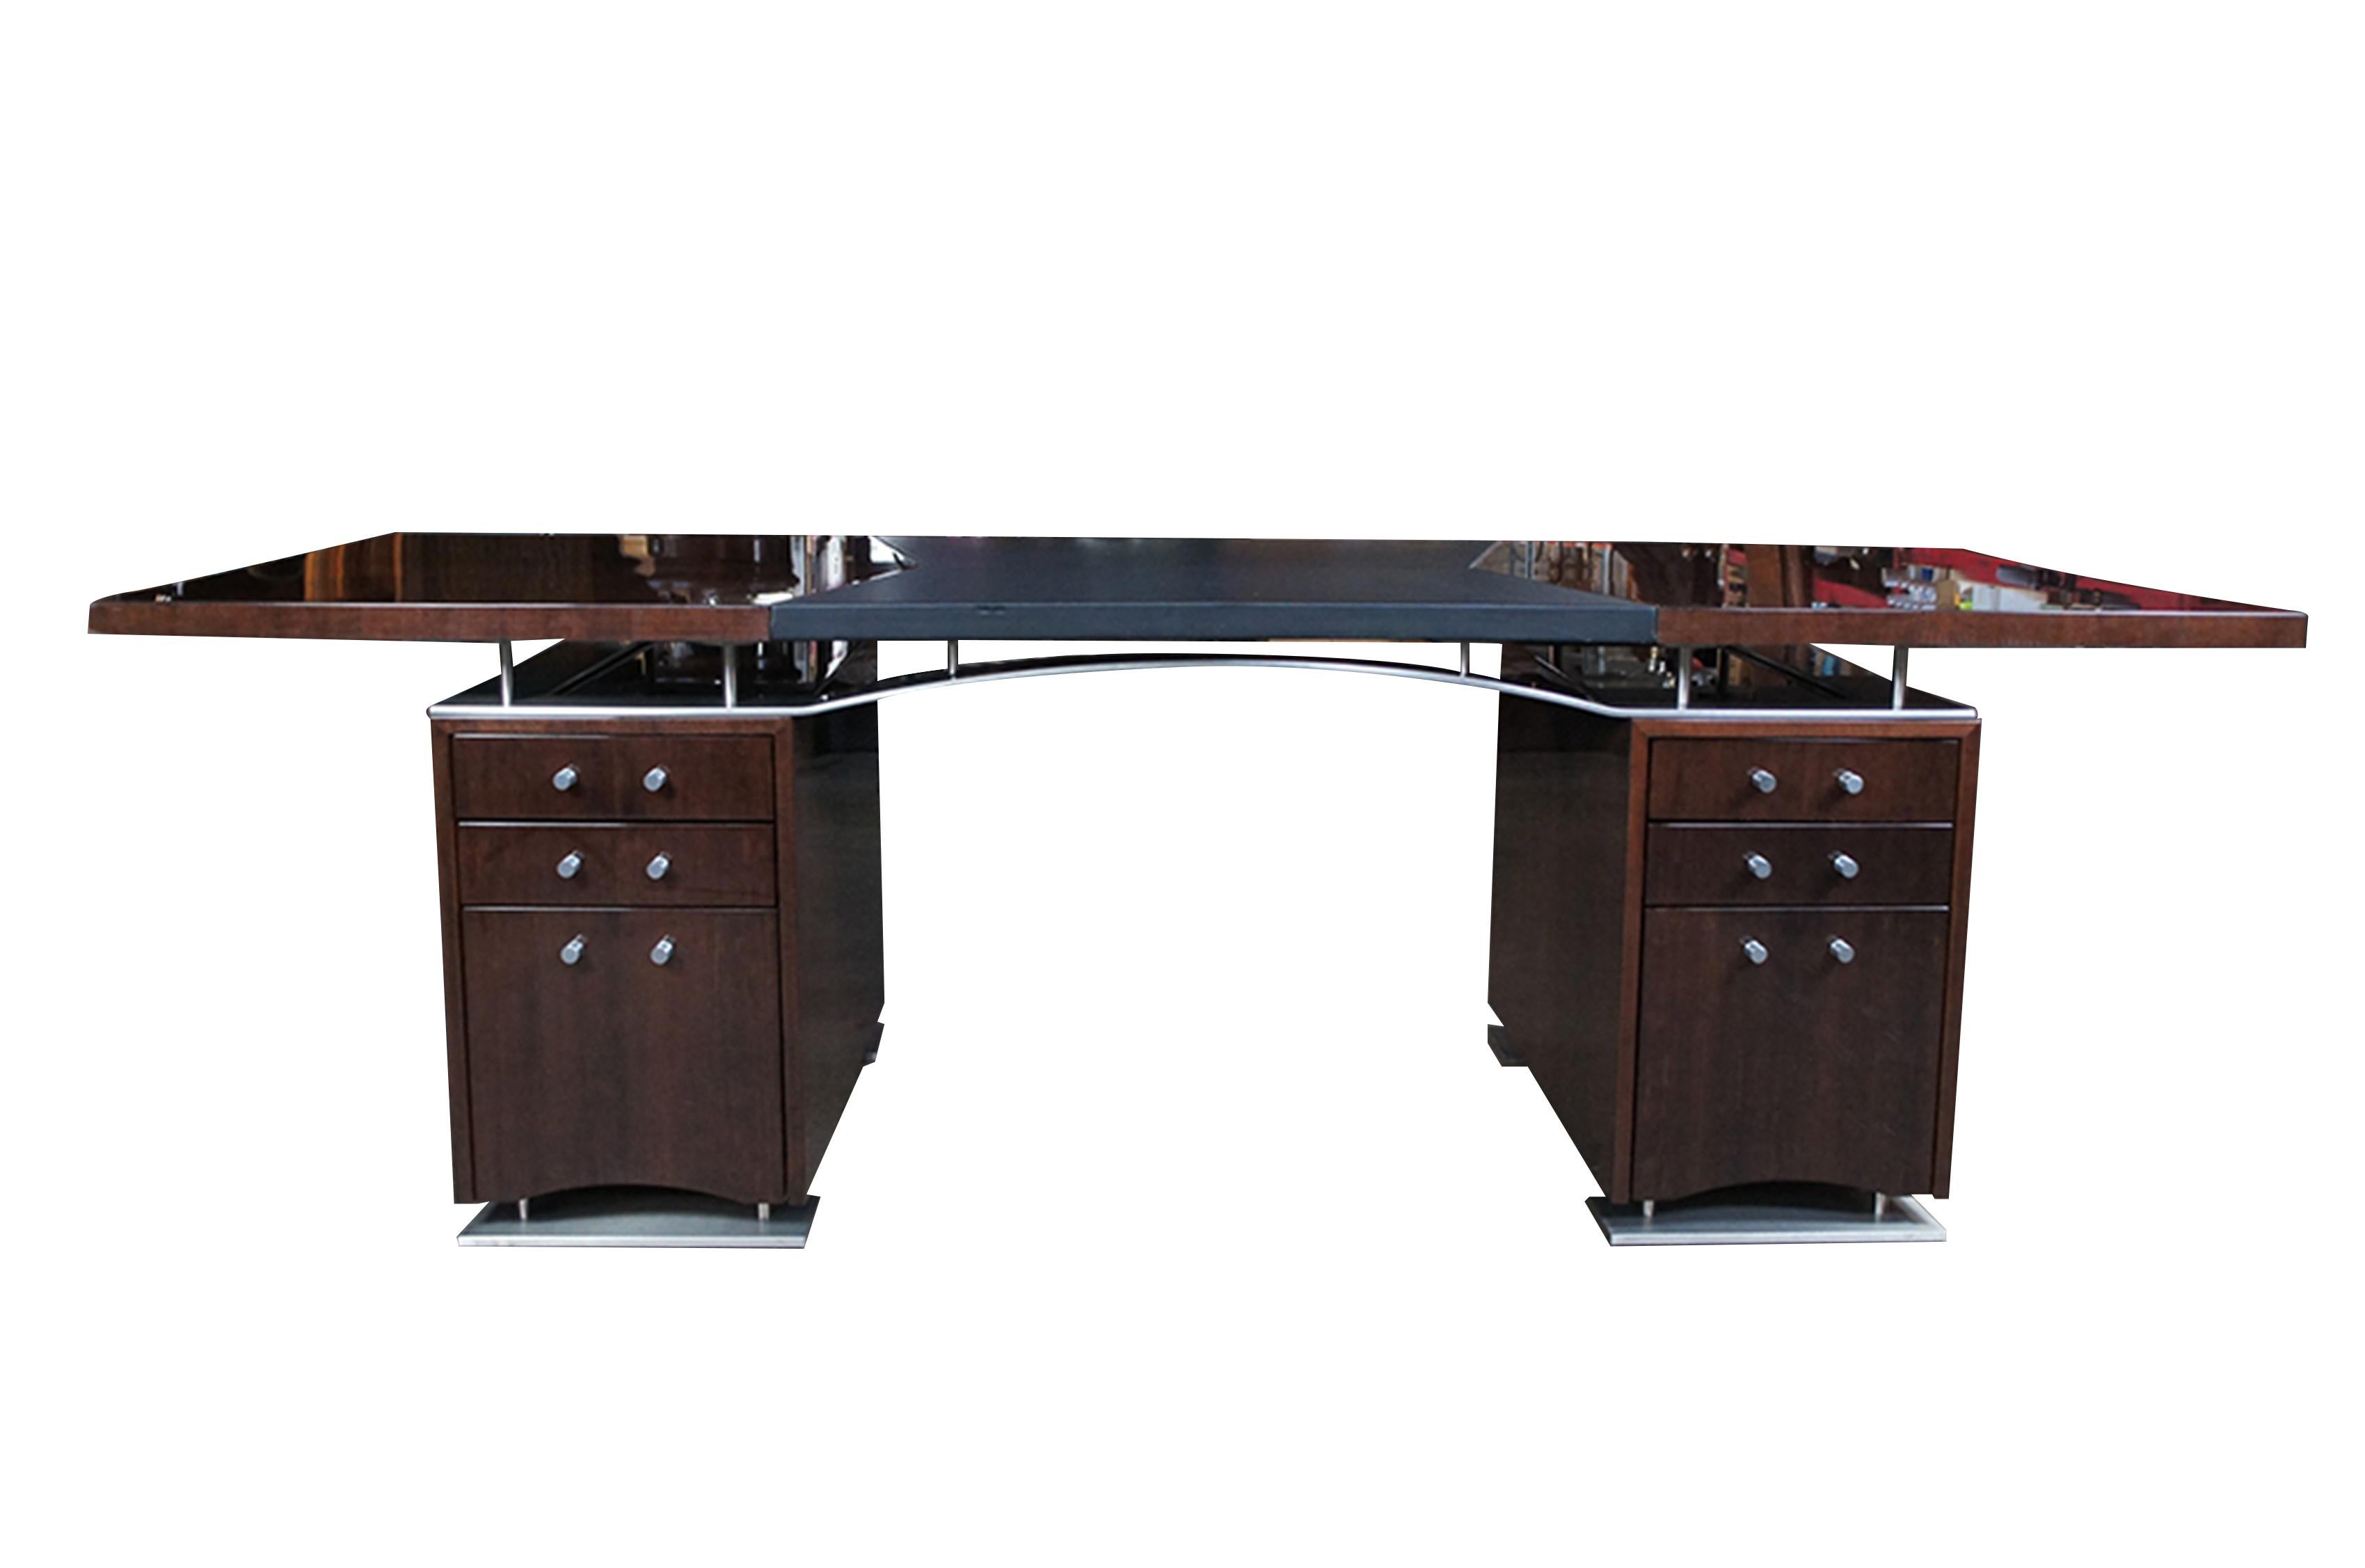 Vintage Dakota Jackson post modern Art Deco style executive partners desk featuring mahogany with leather insert and stainless steel frame.  A V-Shape pattern veneer top with Black Leather inset. 2 pedestal cabinets below: each with 2 standard